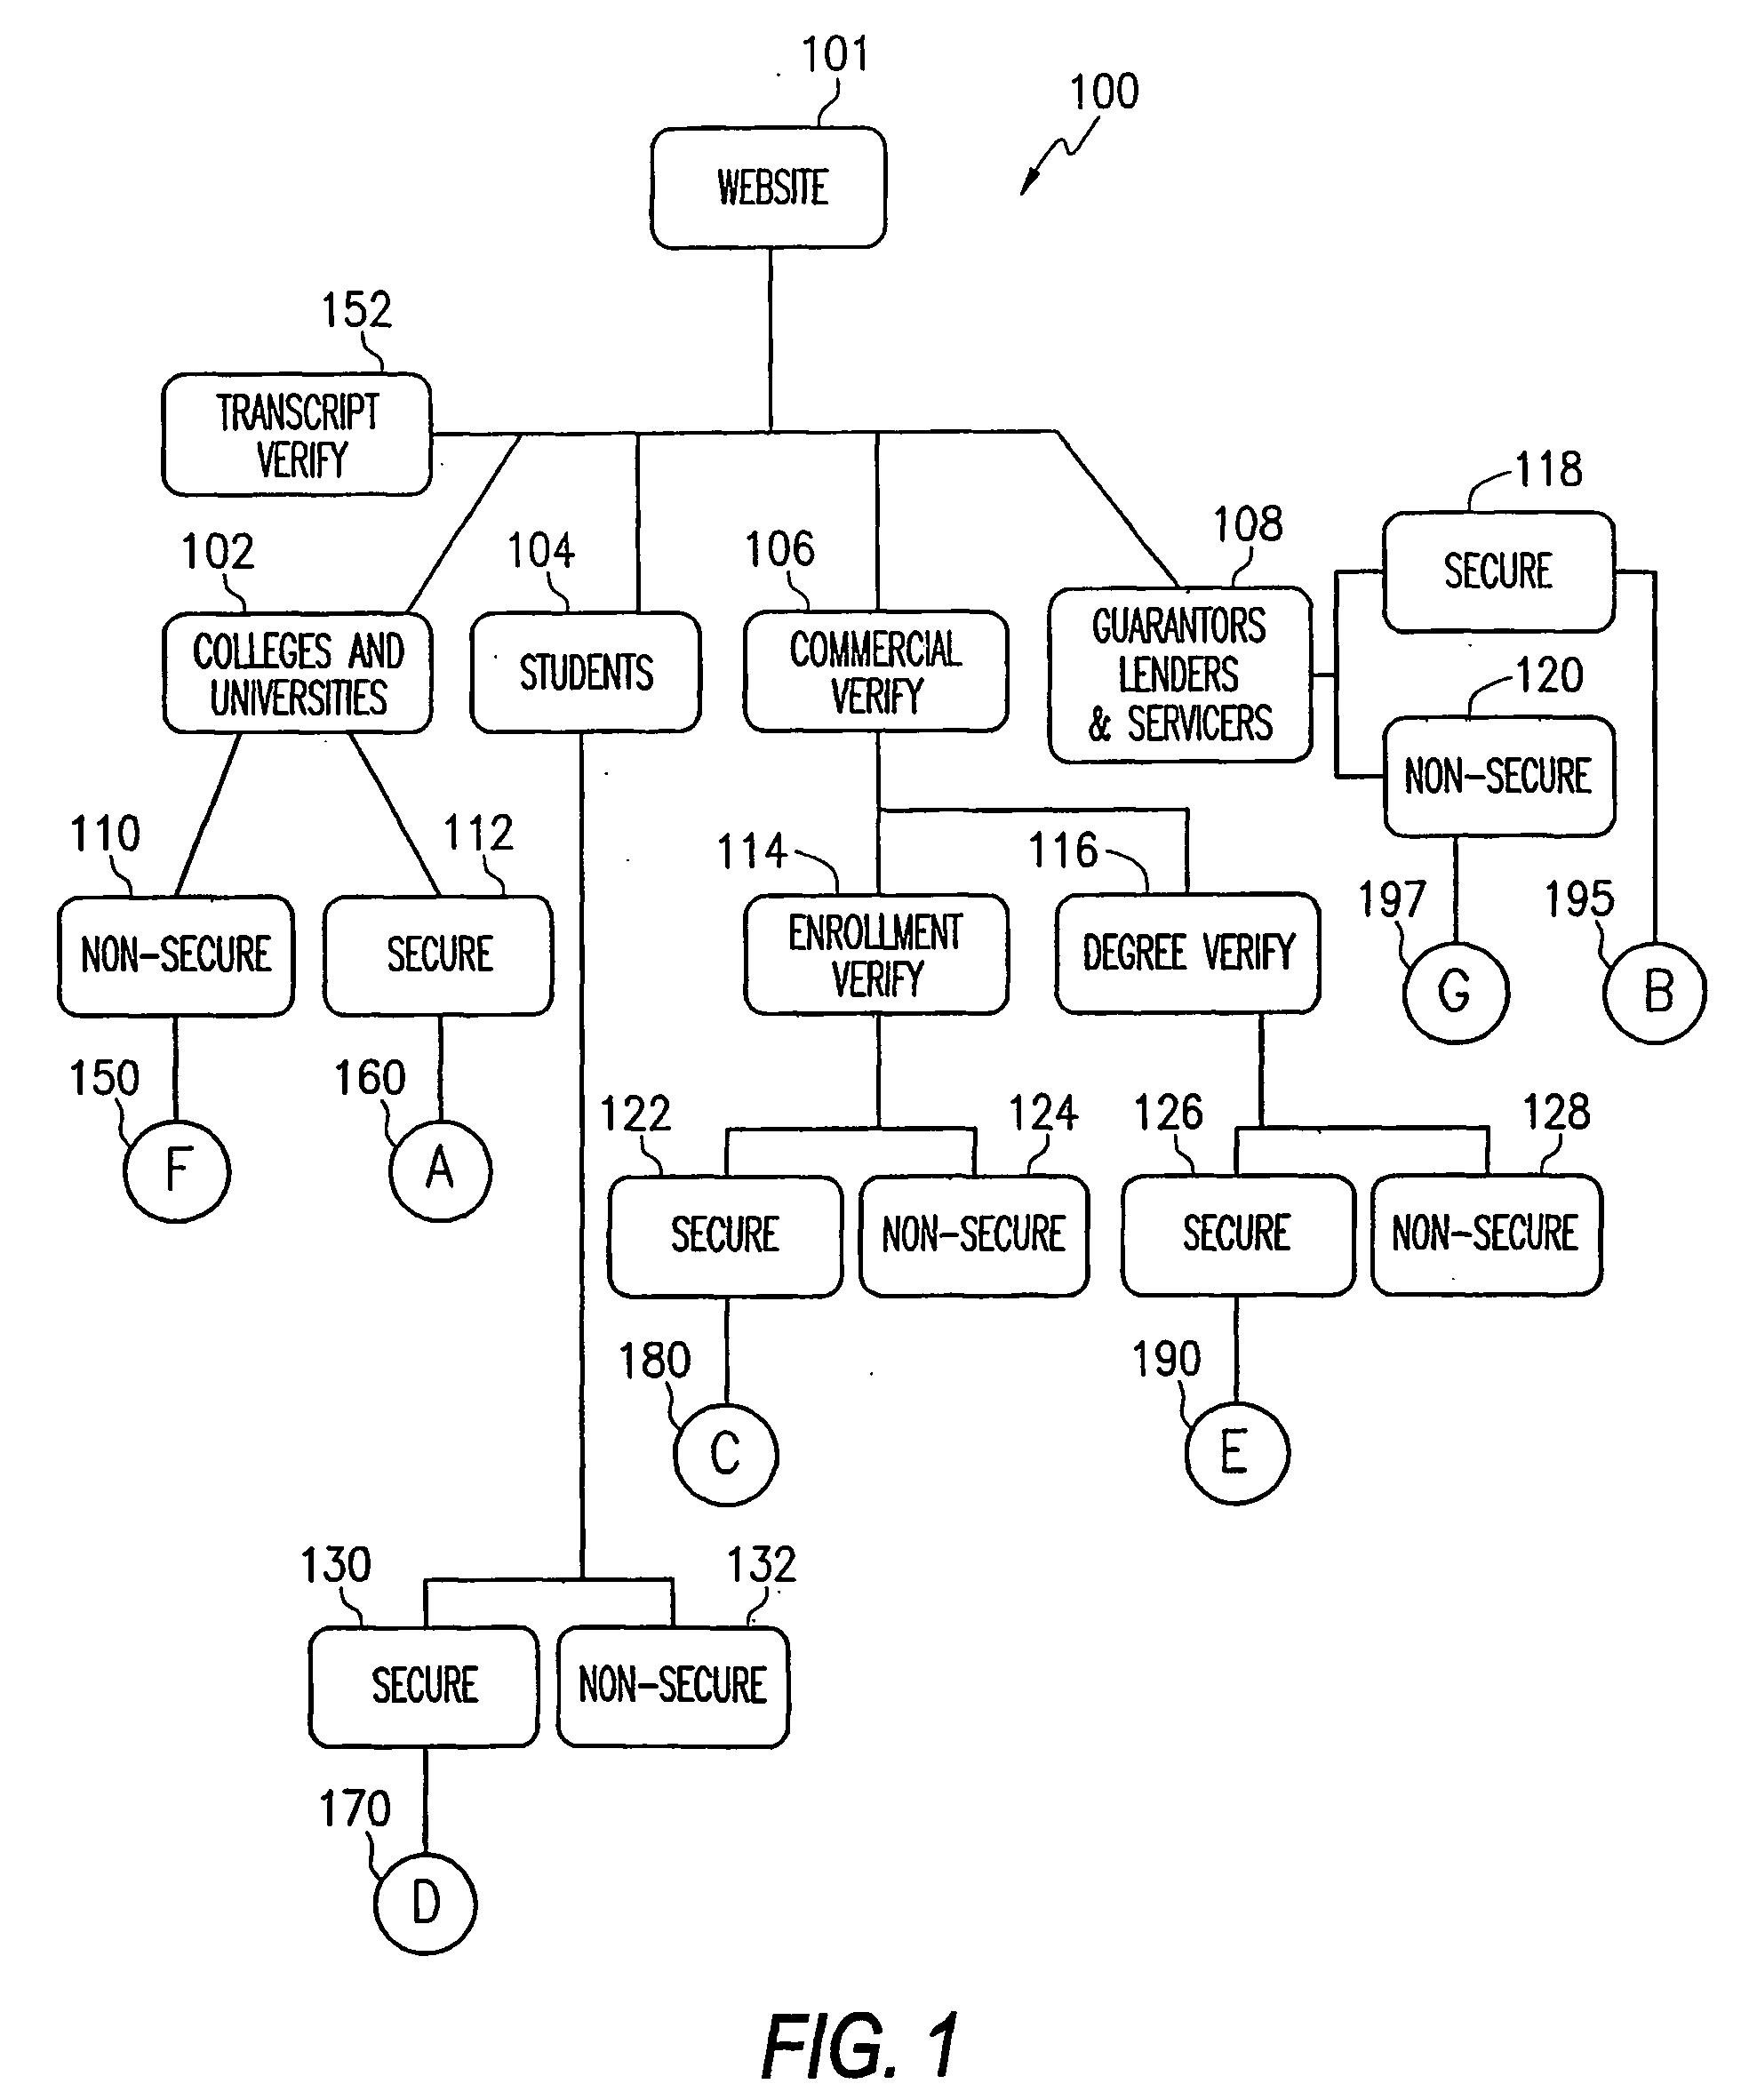 Method for communicating confidential, educational information